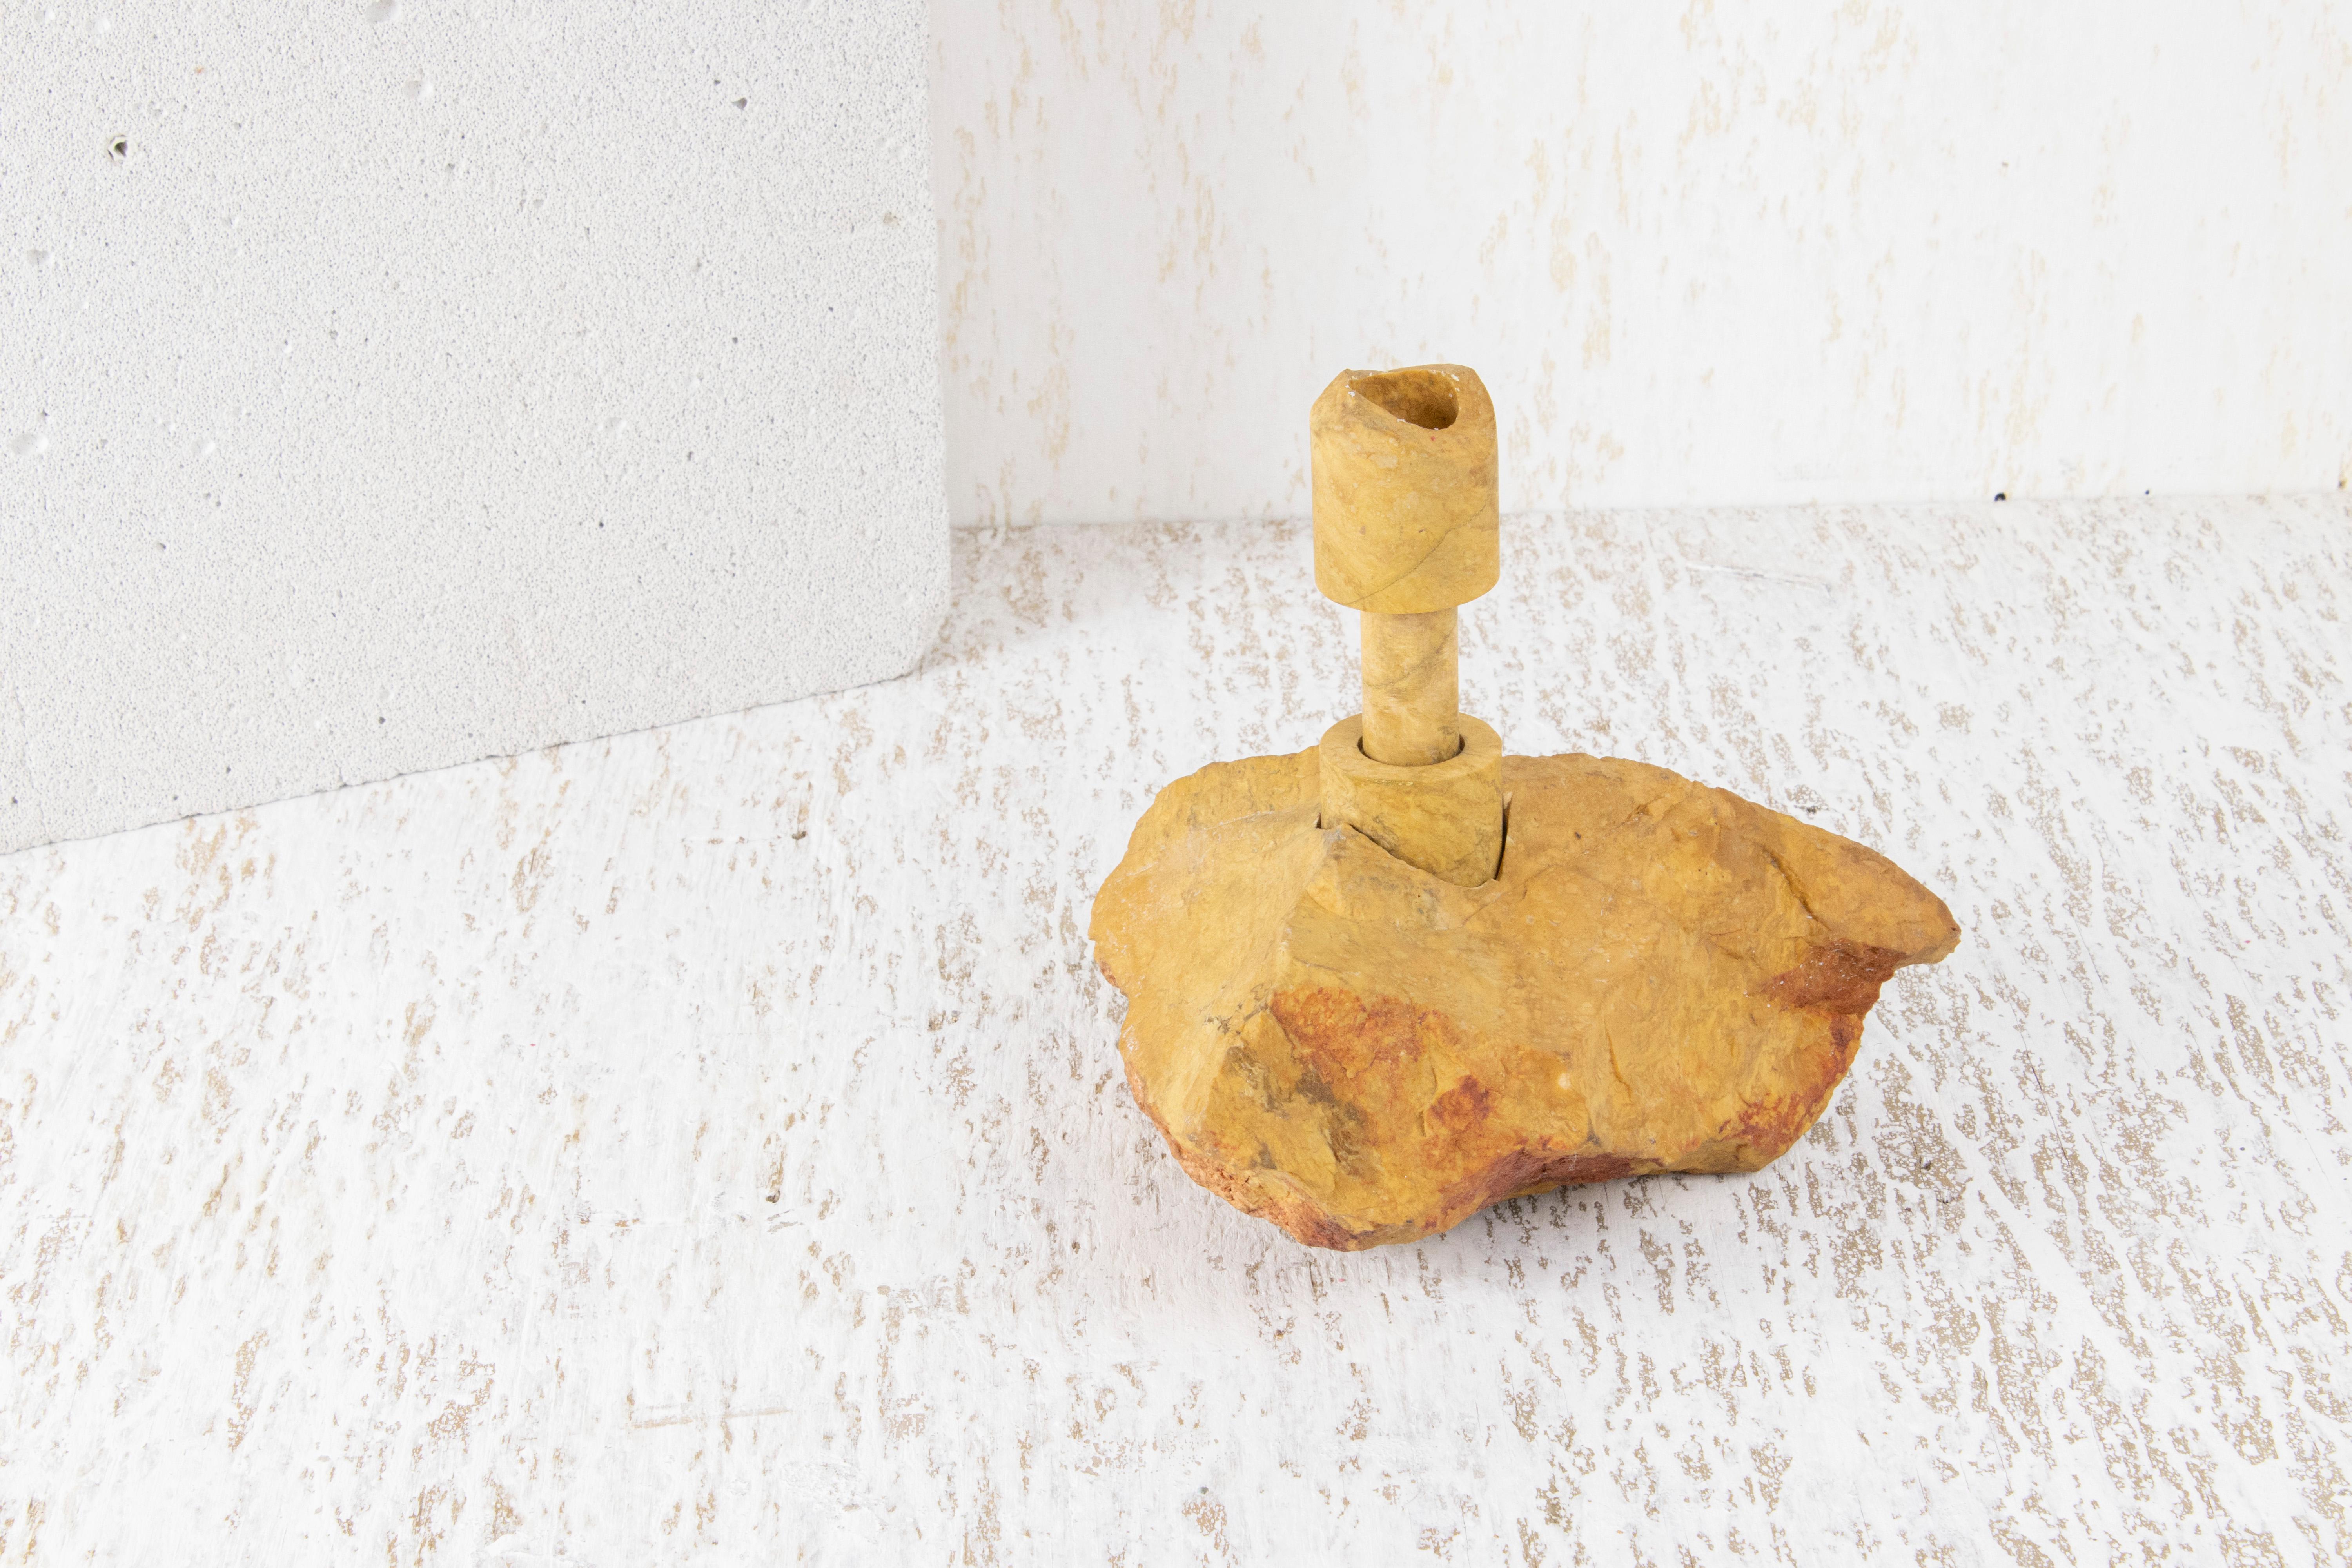 Yellow Jasper Abra Candelabra by Studio DO
Dimensions: D 18 x W 15 x H 18.5 cm
Materials: Yellow jasper, brass.
2.5 kg.

Stone and fire are connected in an ageless bond. A sparkle created by clashing two stones with each other has been igniting fire